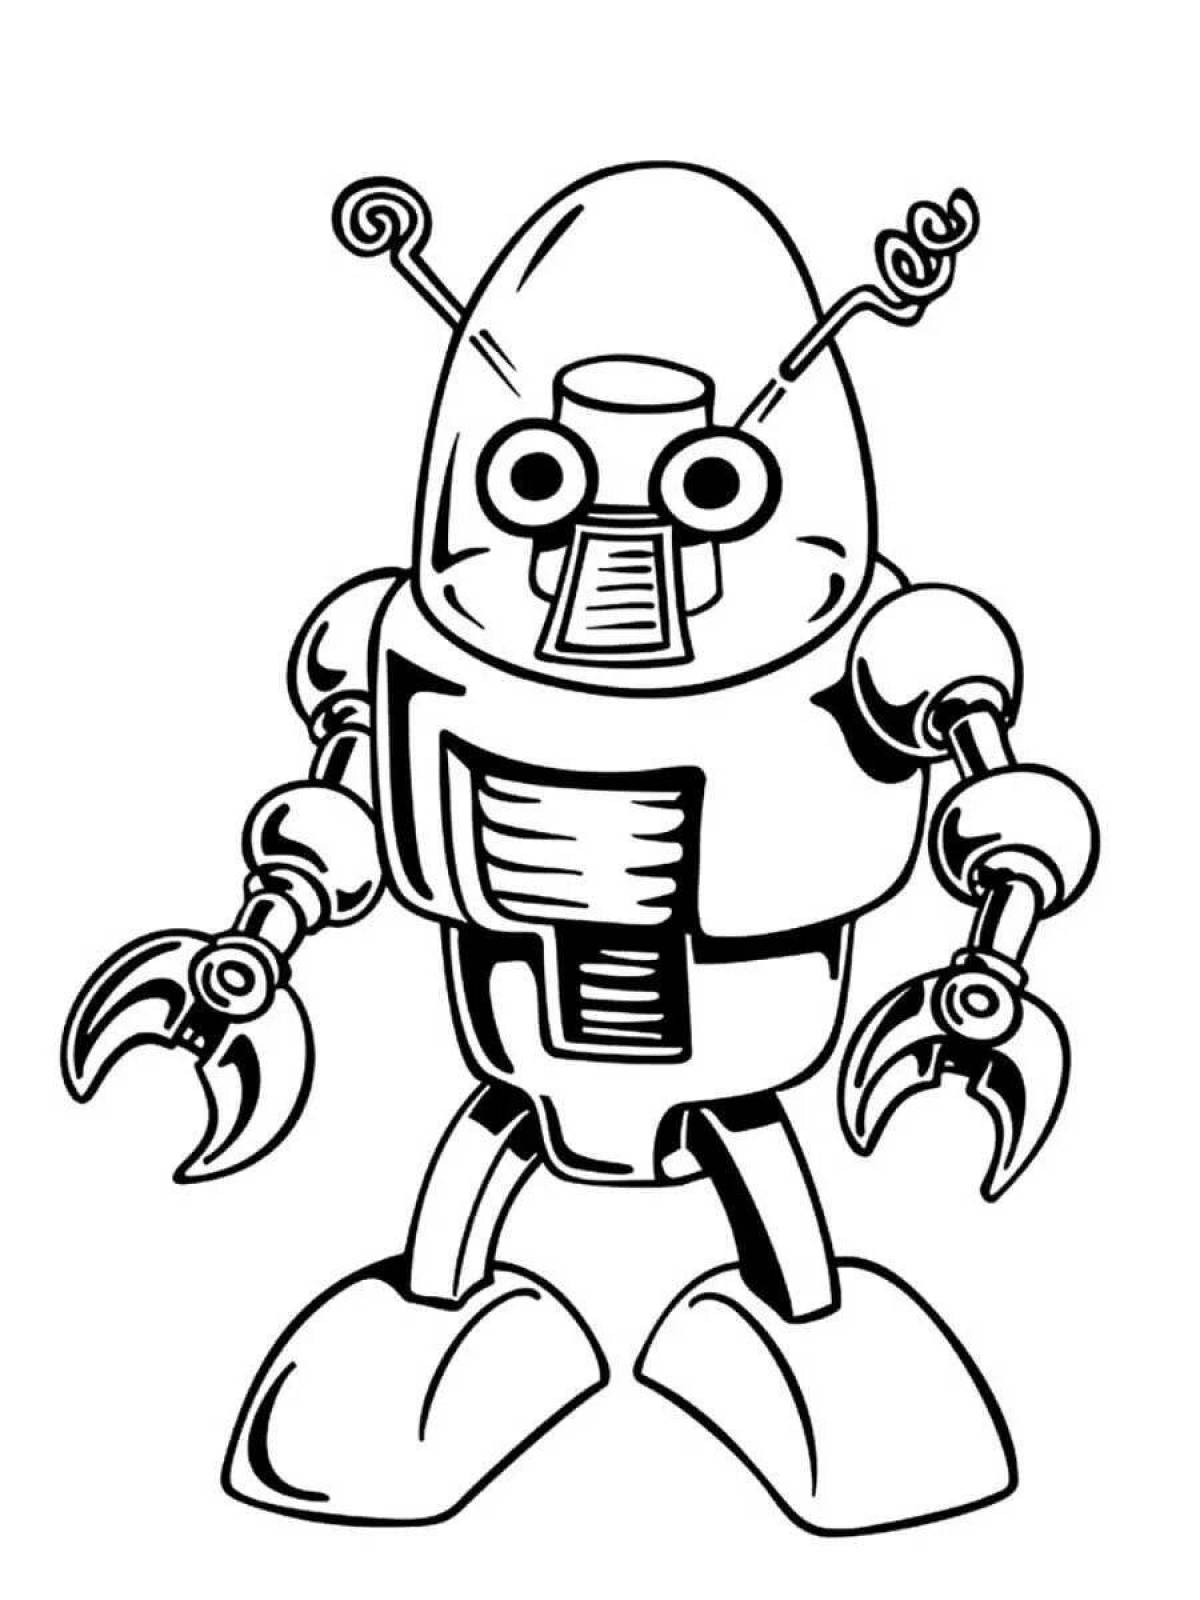 Playful robot coloring page for kids